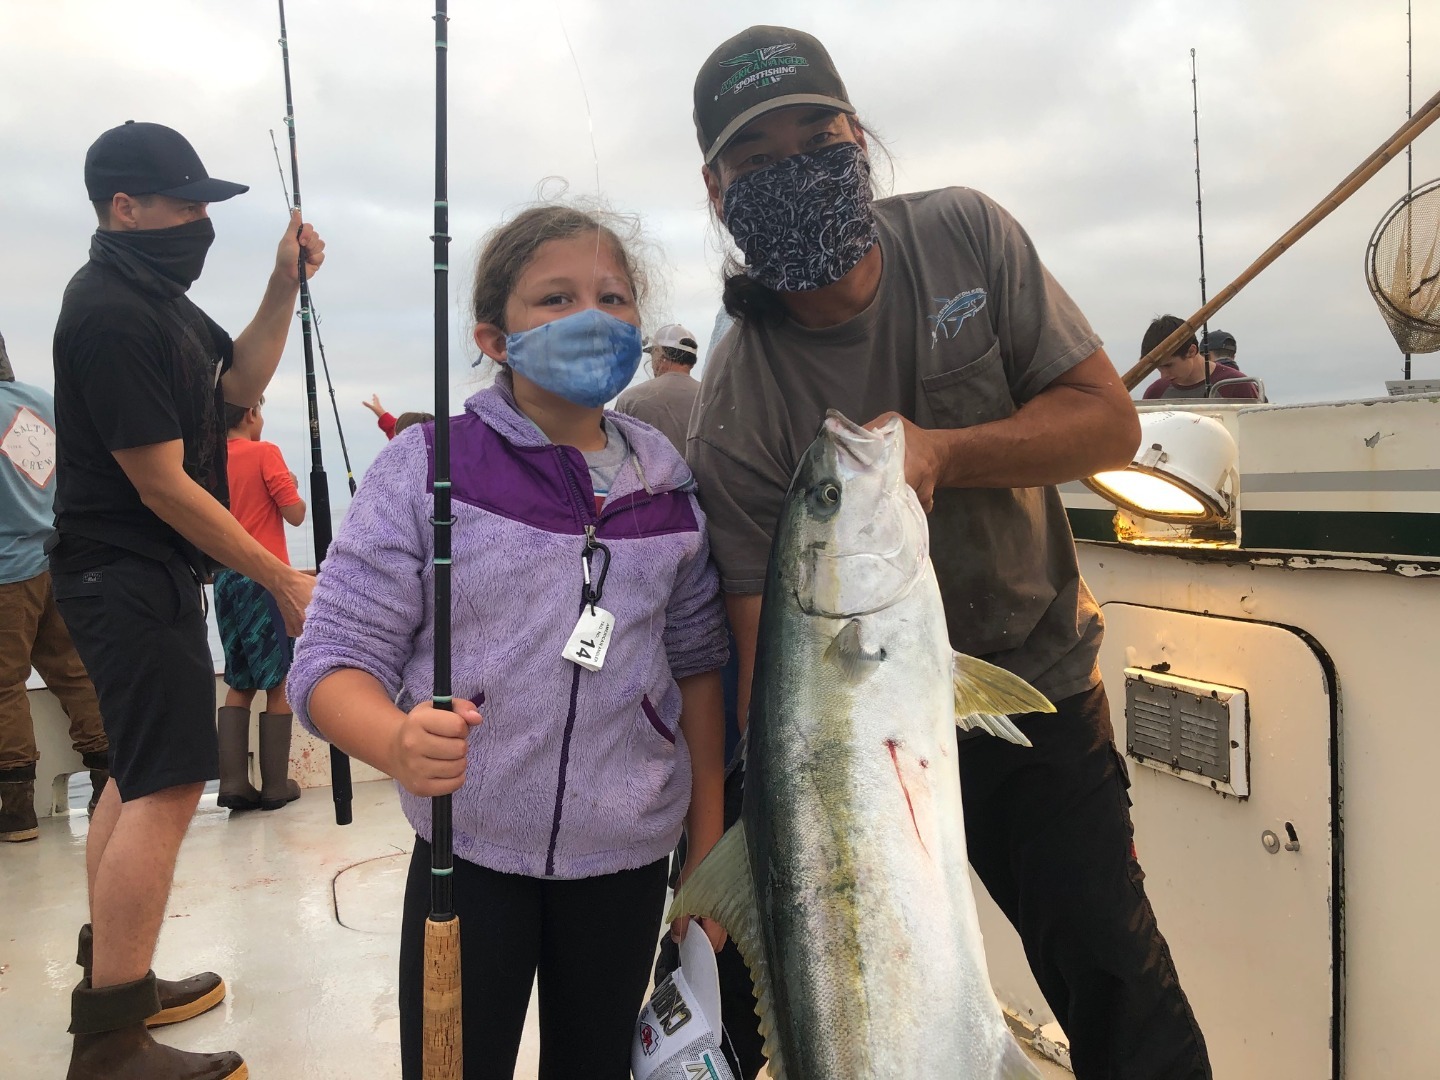 American Angler Fish Report - perfect conditions - August 25, 2020